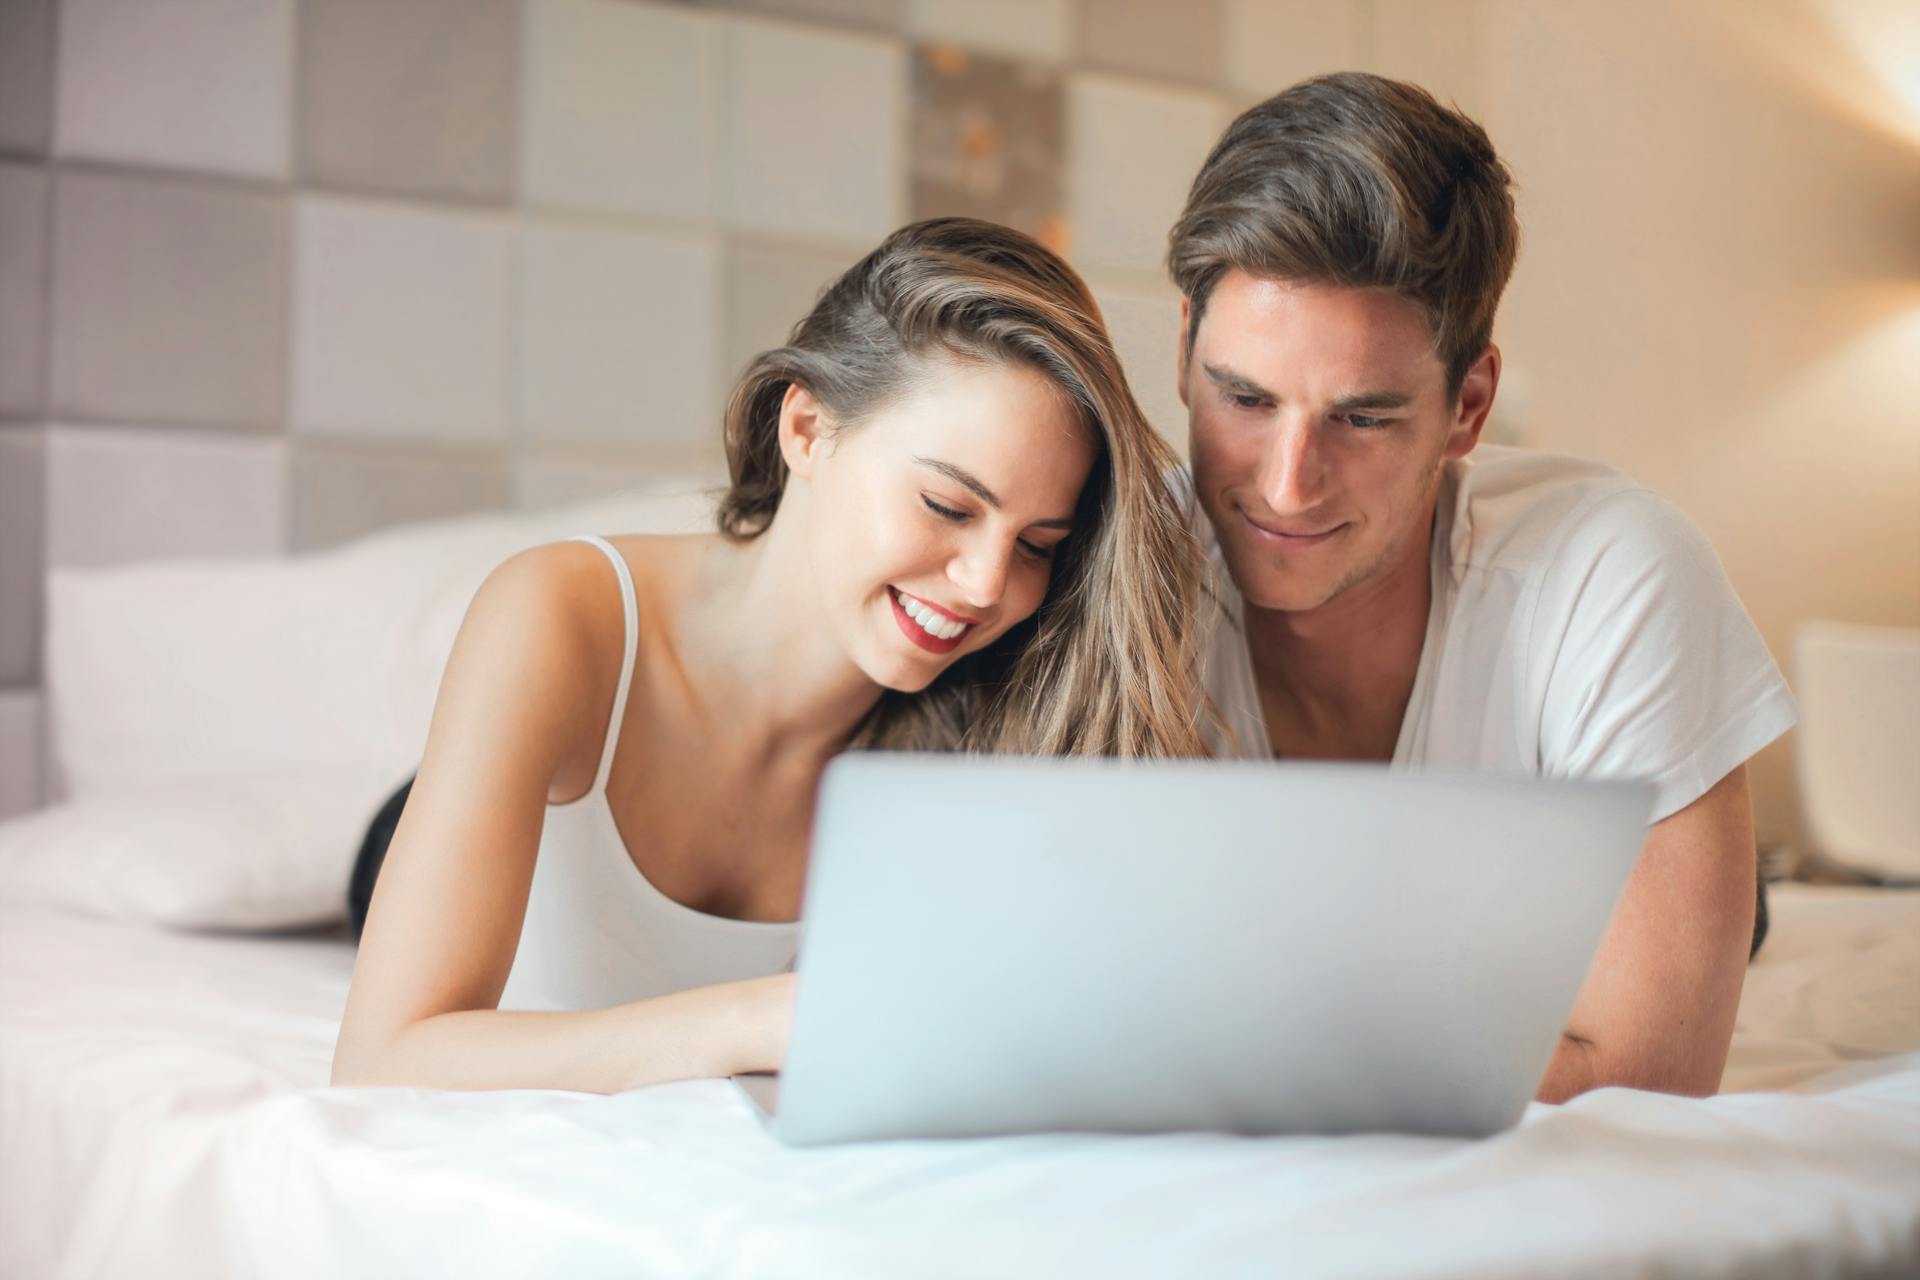 A young couple using a laptop | Source: Pexels